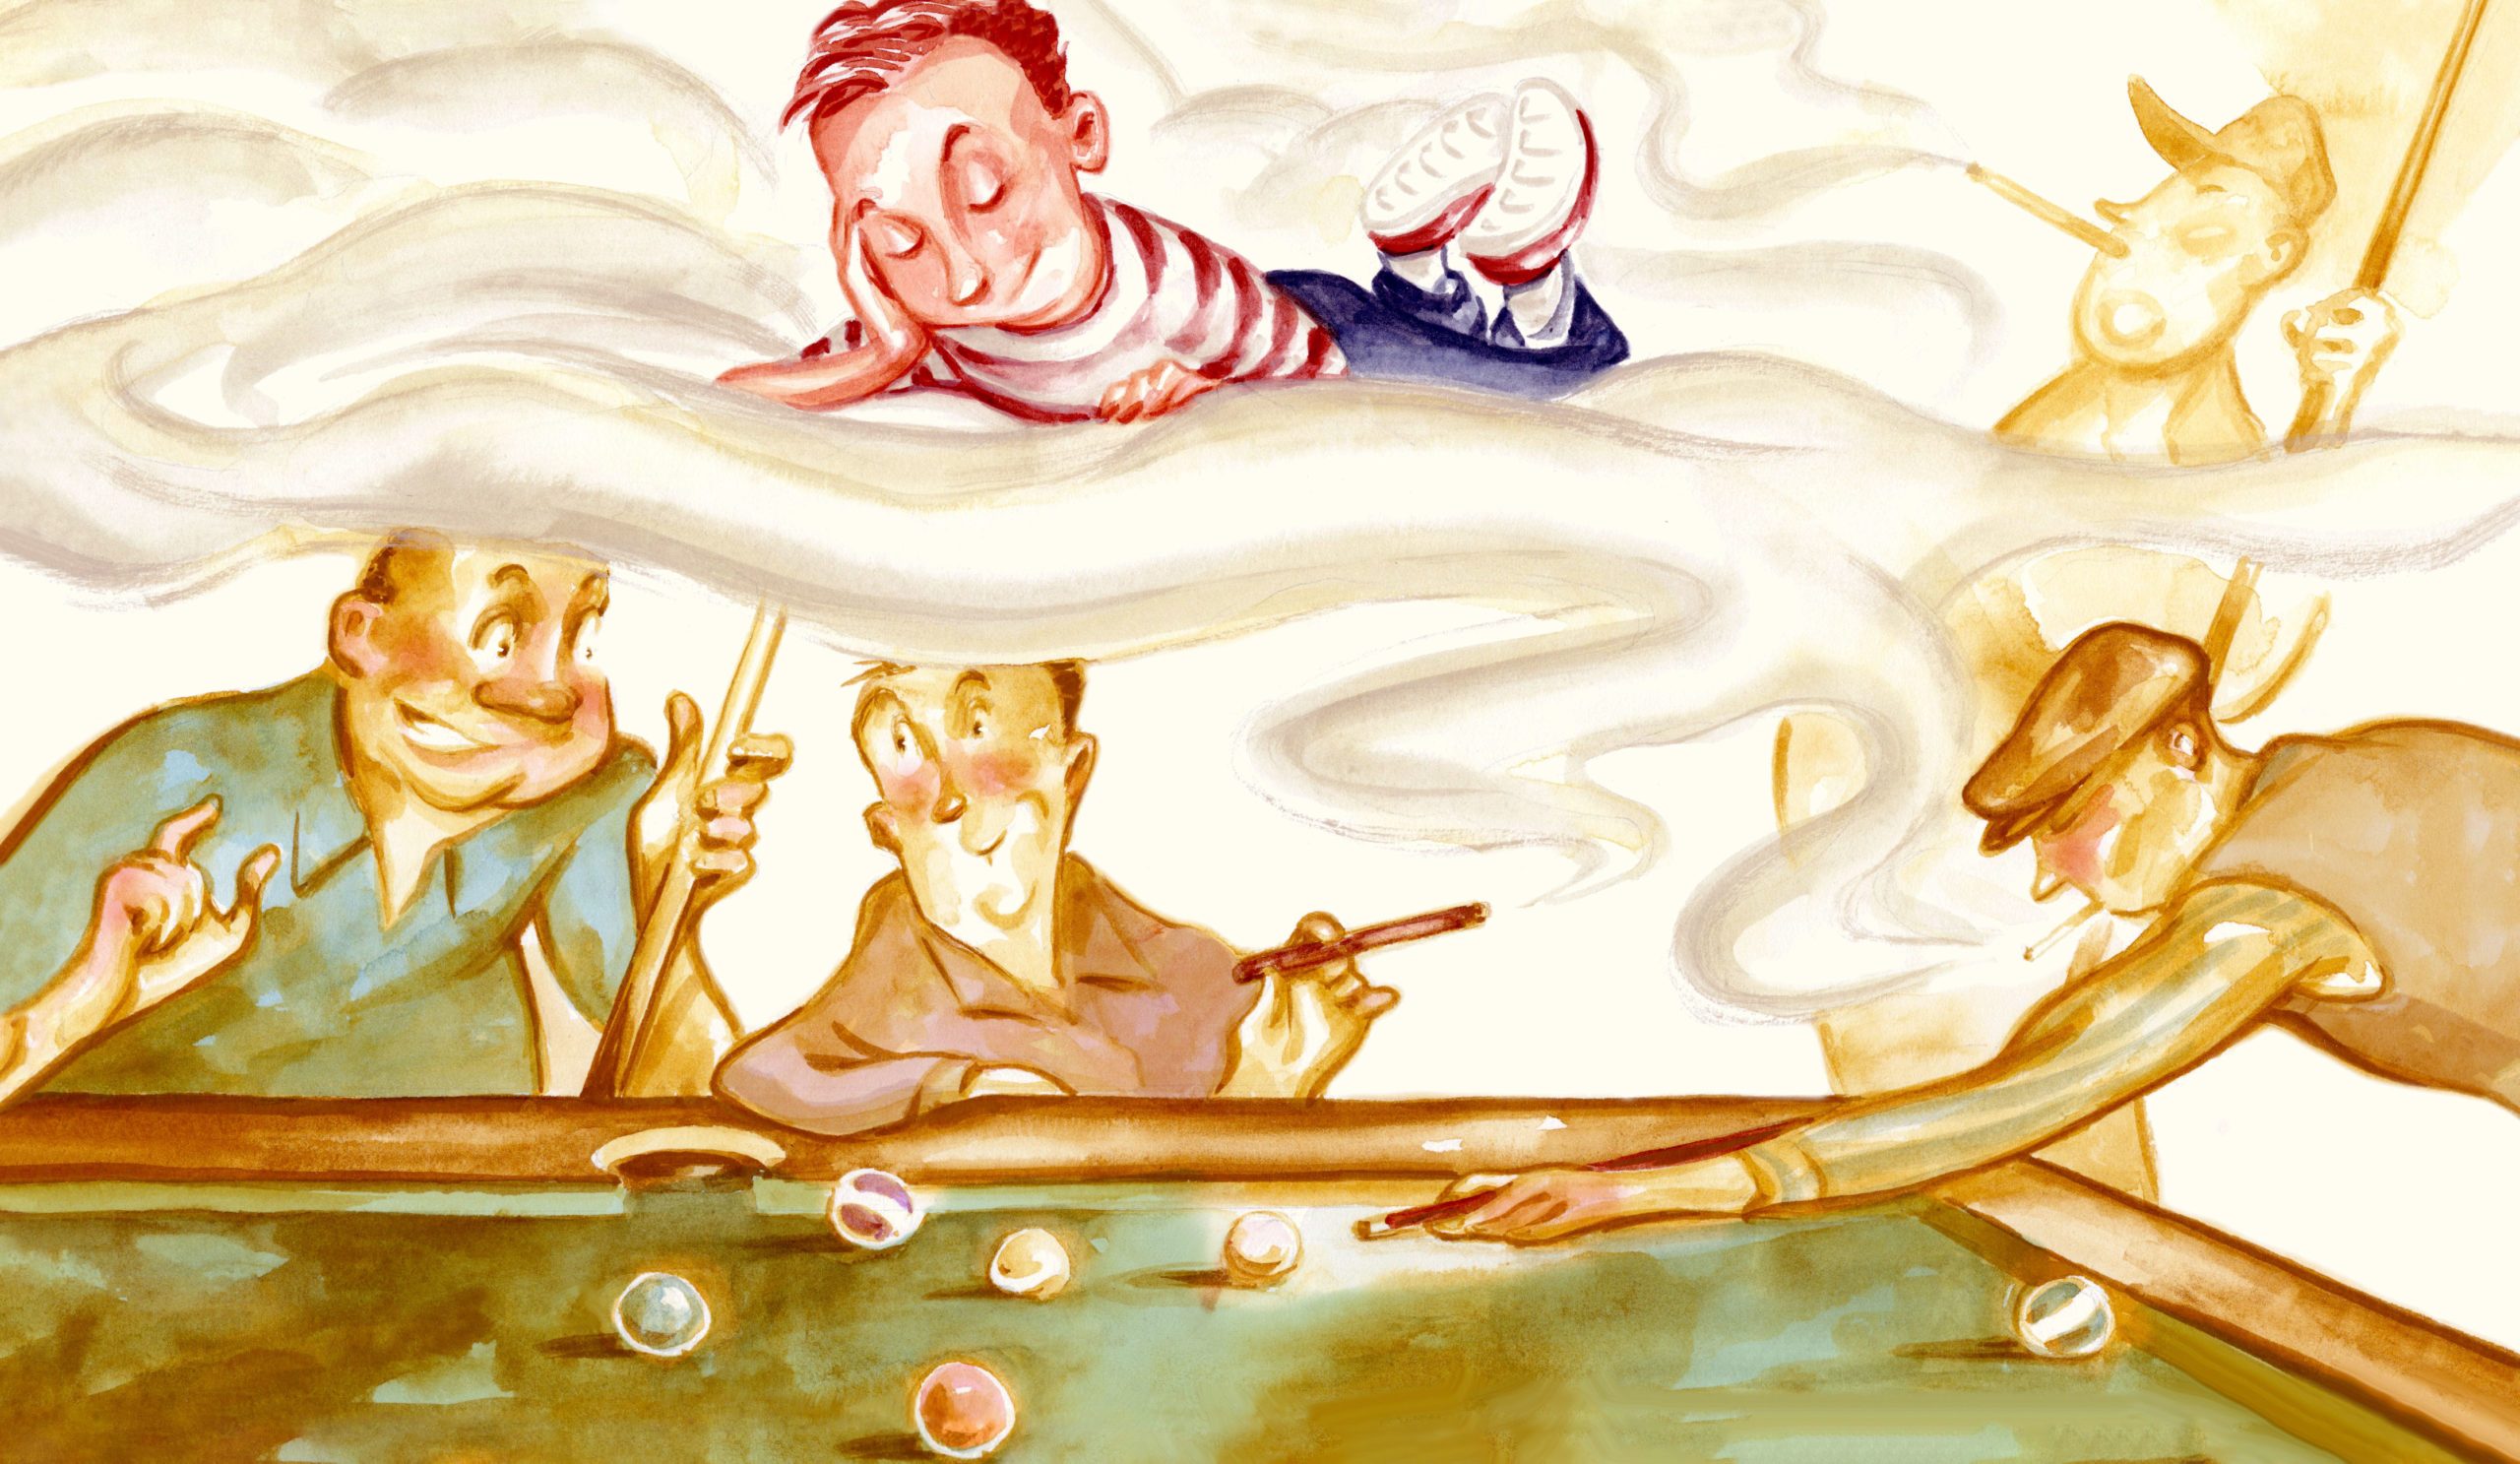 illustration of the child floating in the smoke above the pool table, looking down at the players